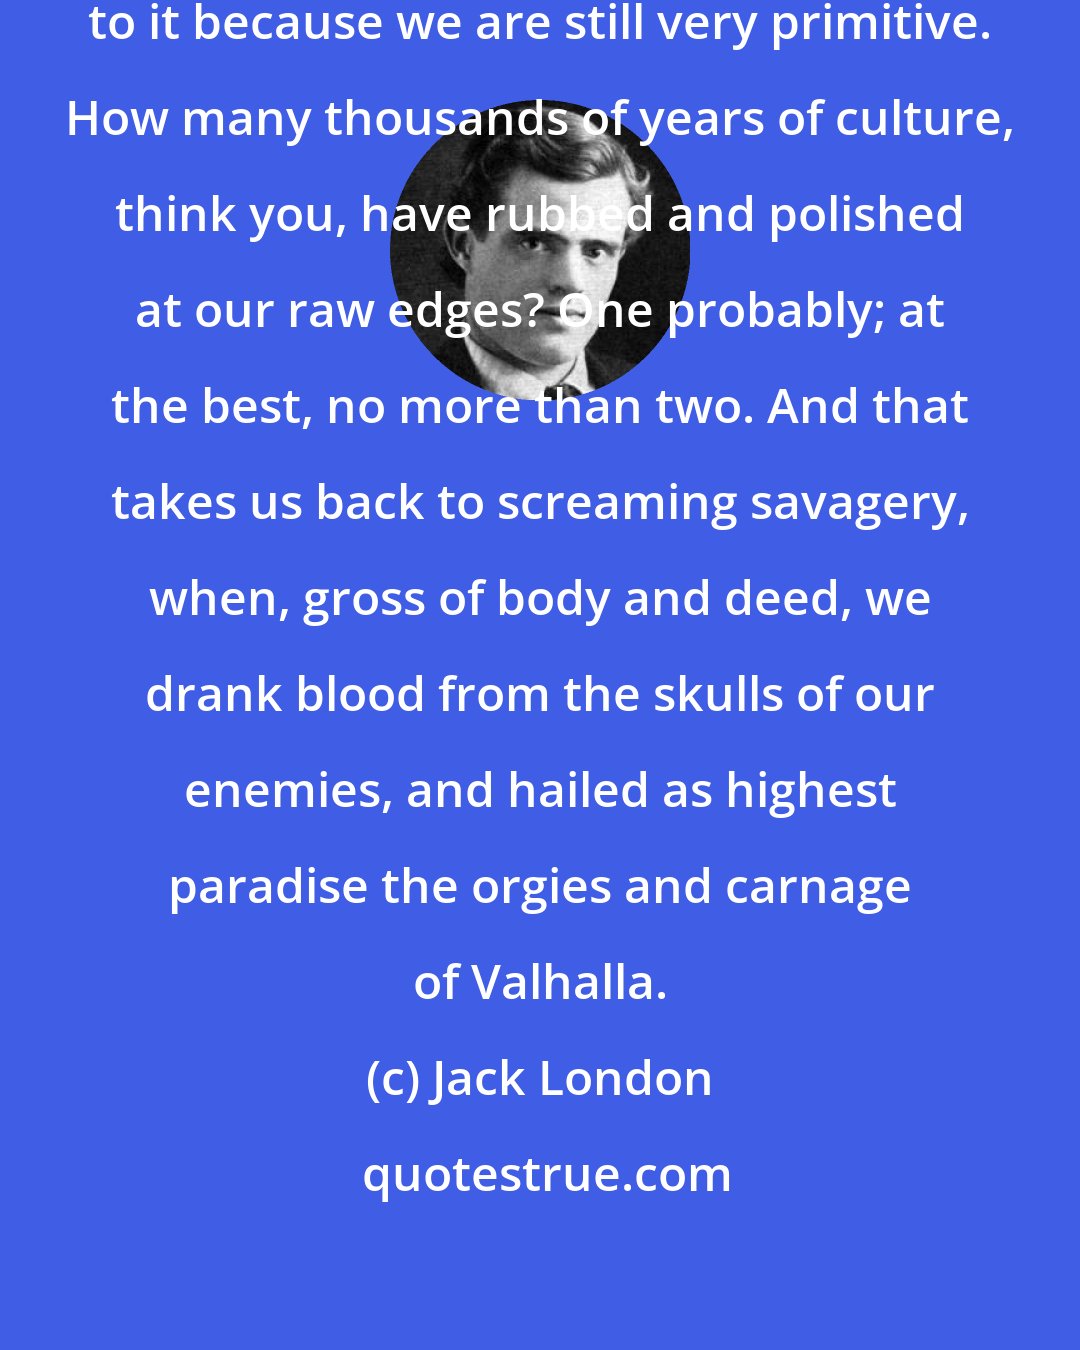 Jack London: As for the primitive, I hark back to it because we are still very primitive. How many thousands of years of culture, think you, have rubbed and polished at our raw edges? One probably; at the best, no more than two. And that takes us back to screaming savagery, when, gross of body and deed, we drank blood from the skulls of our enemies, and hailed as highest paradise the orgies and carnage of Valhalla.